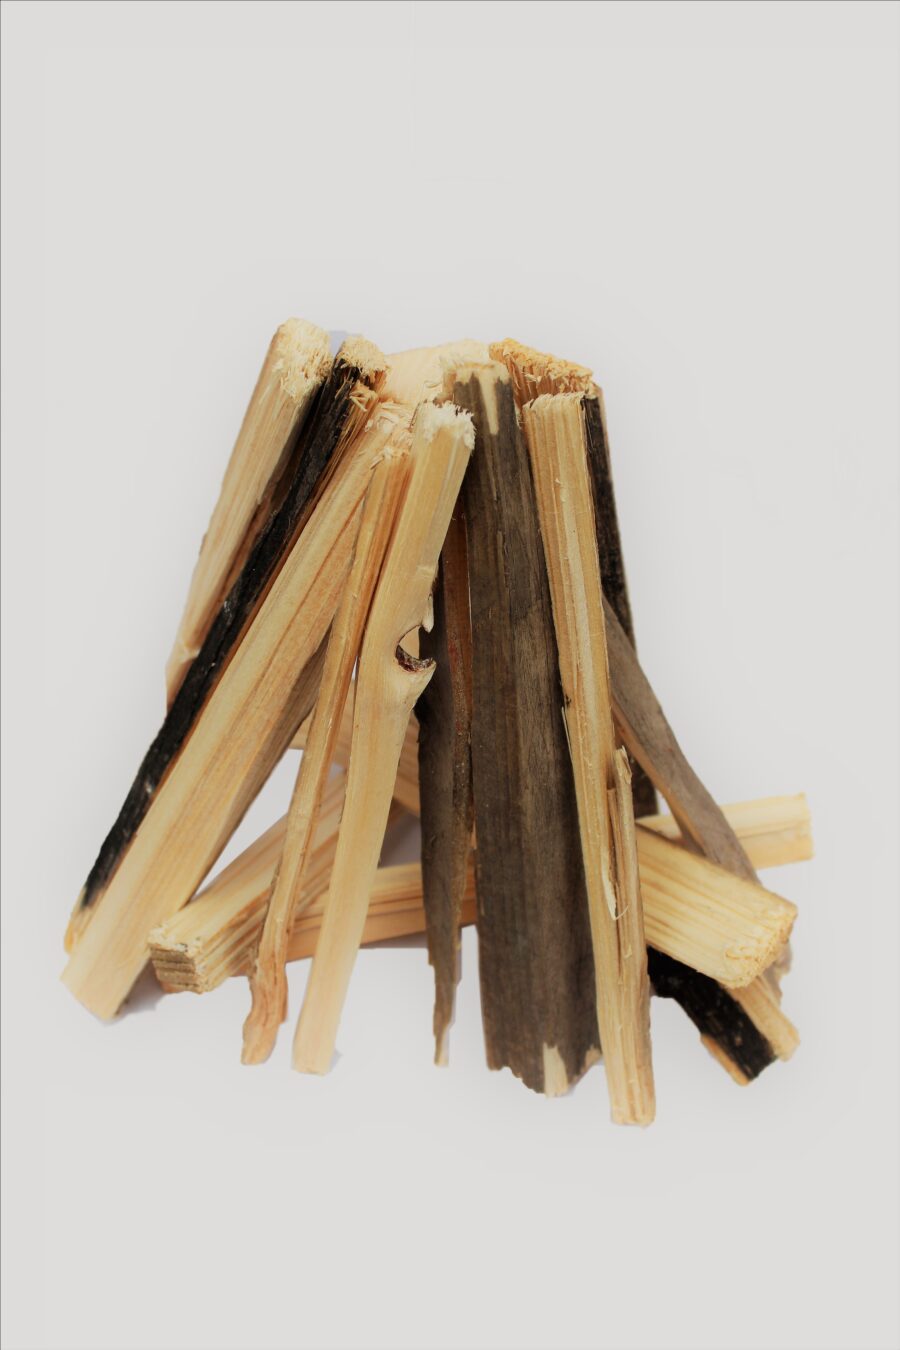 Kindling pieces